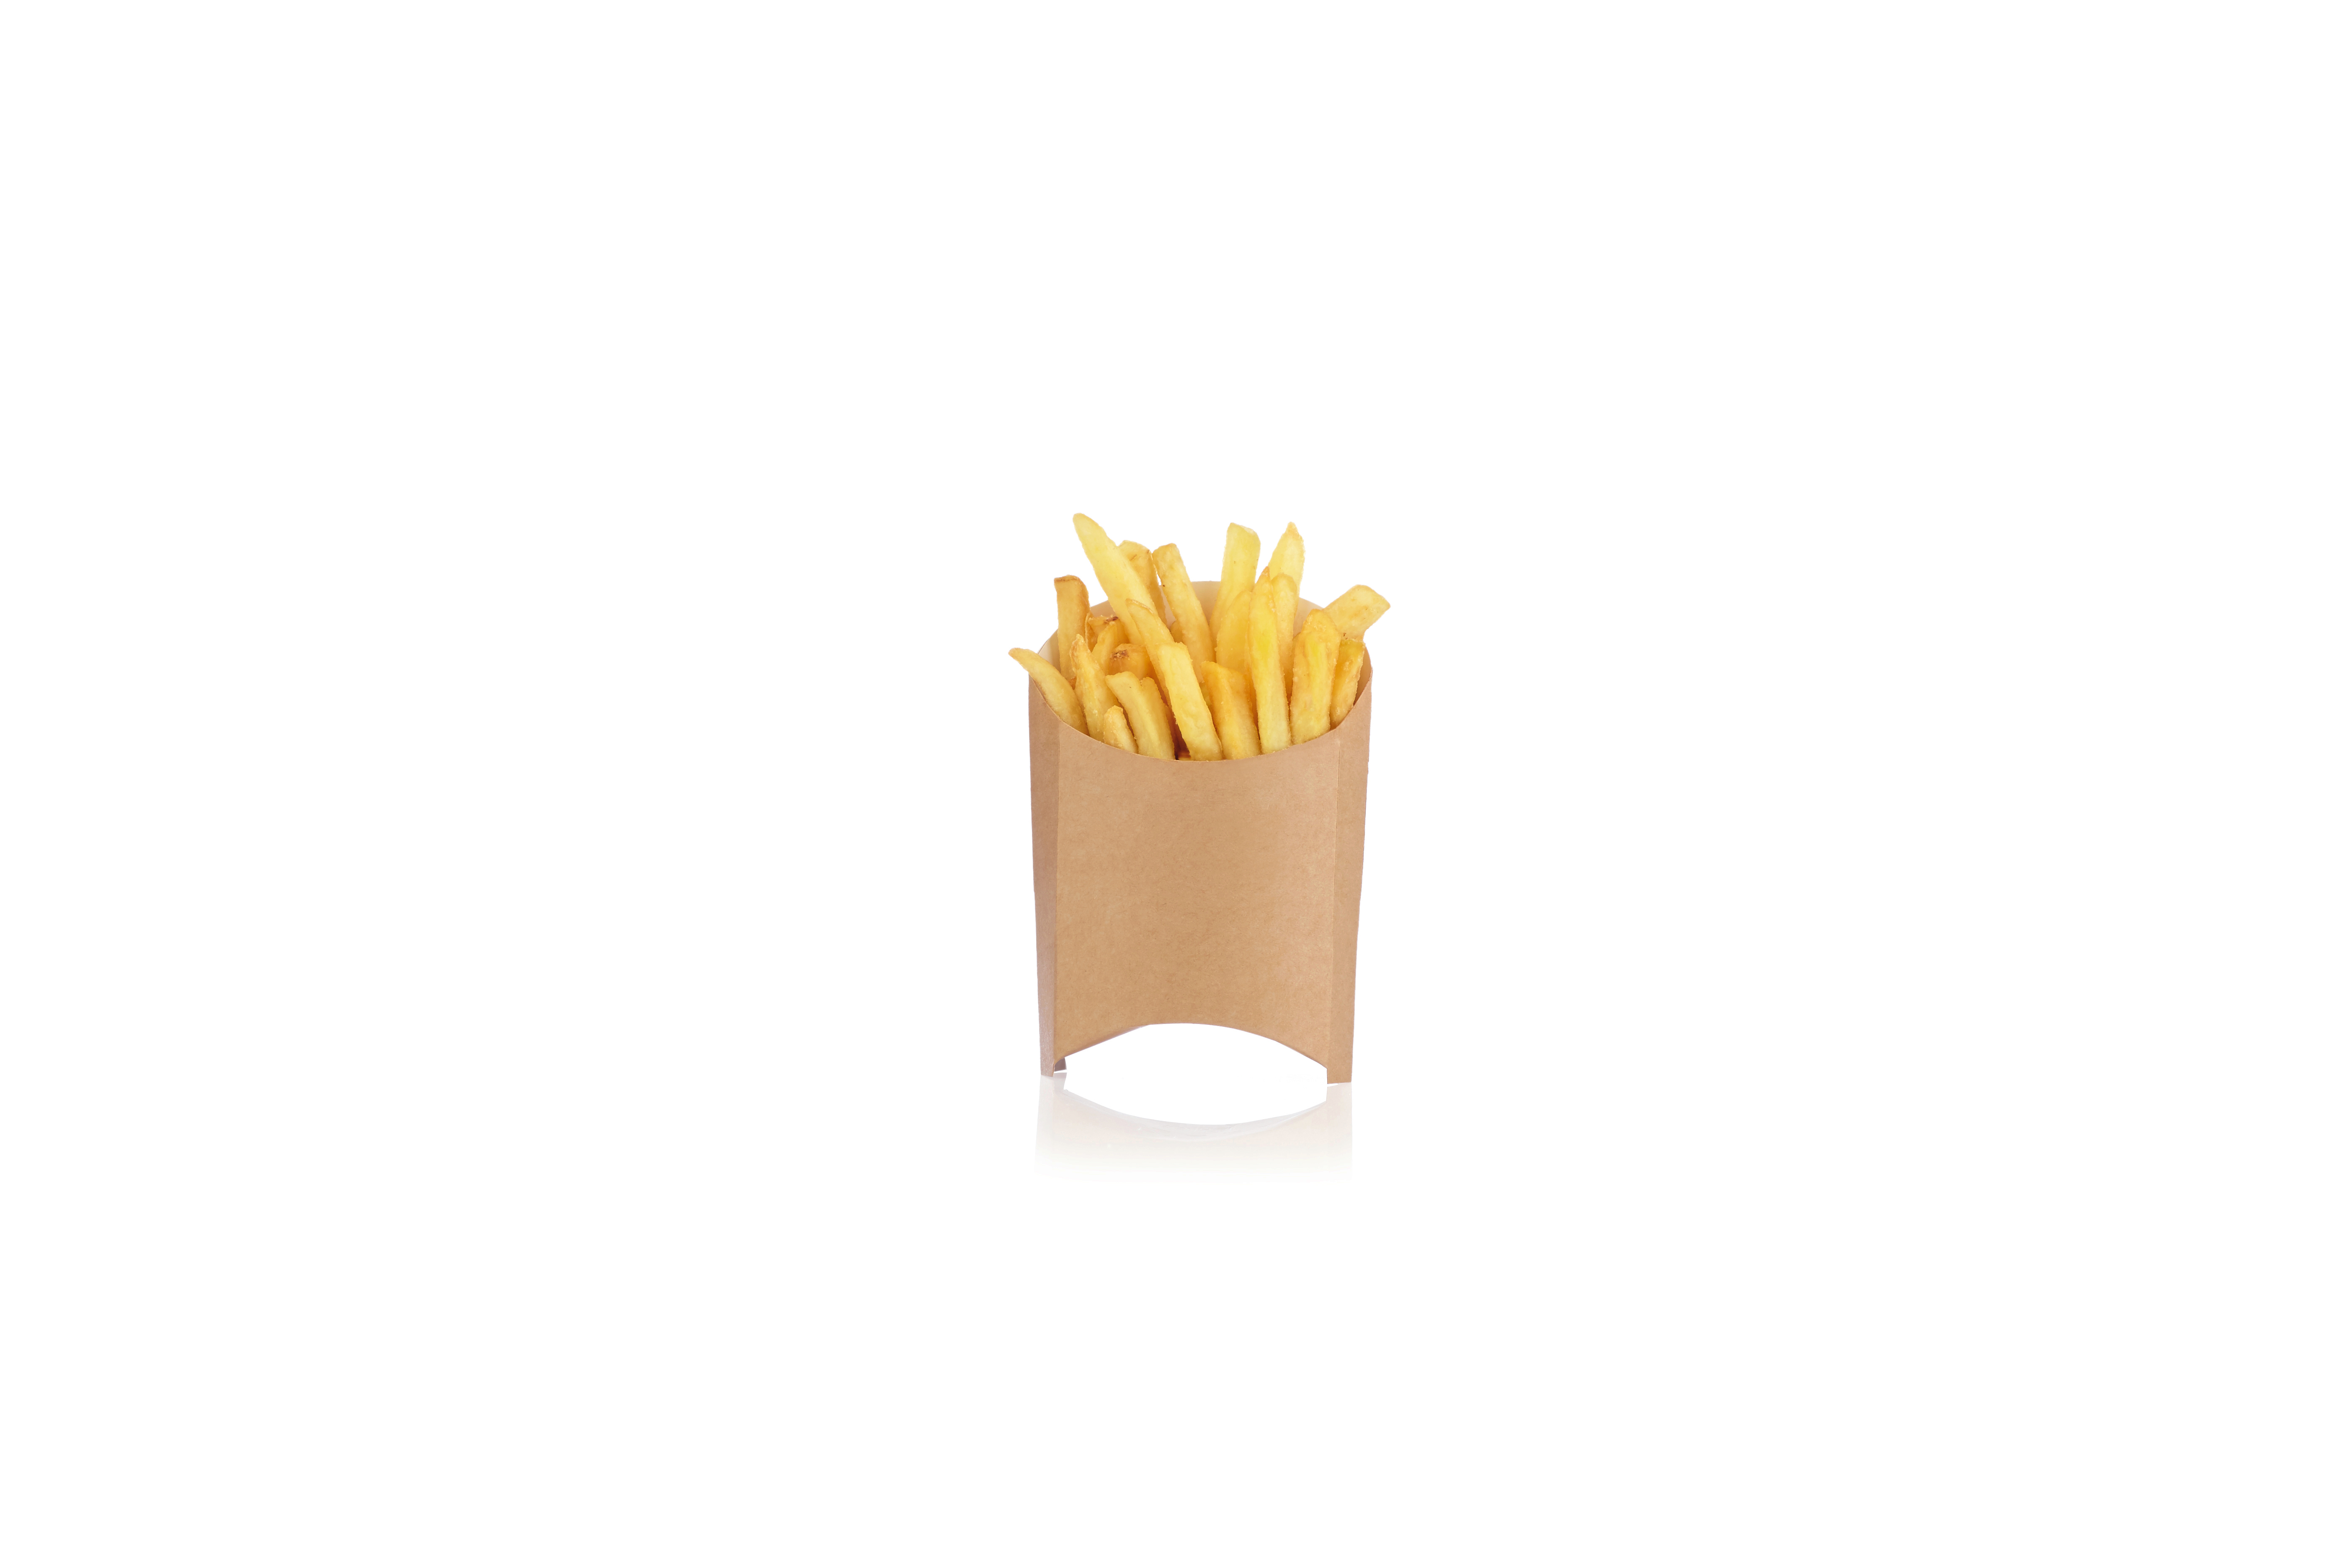 OSQ FRY M packaging for French fries